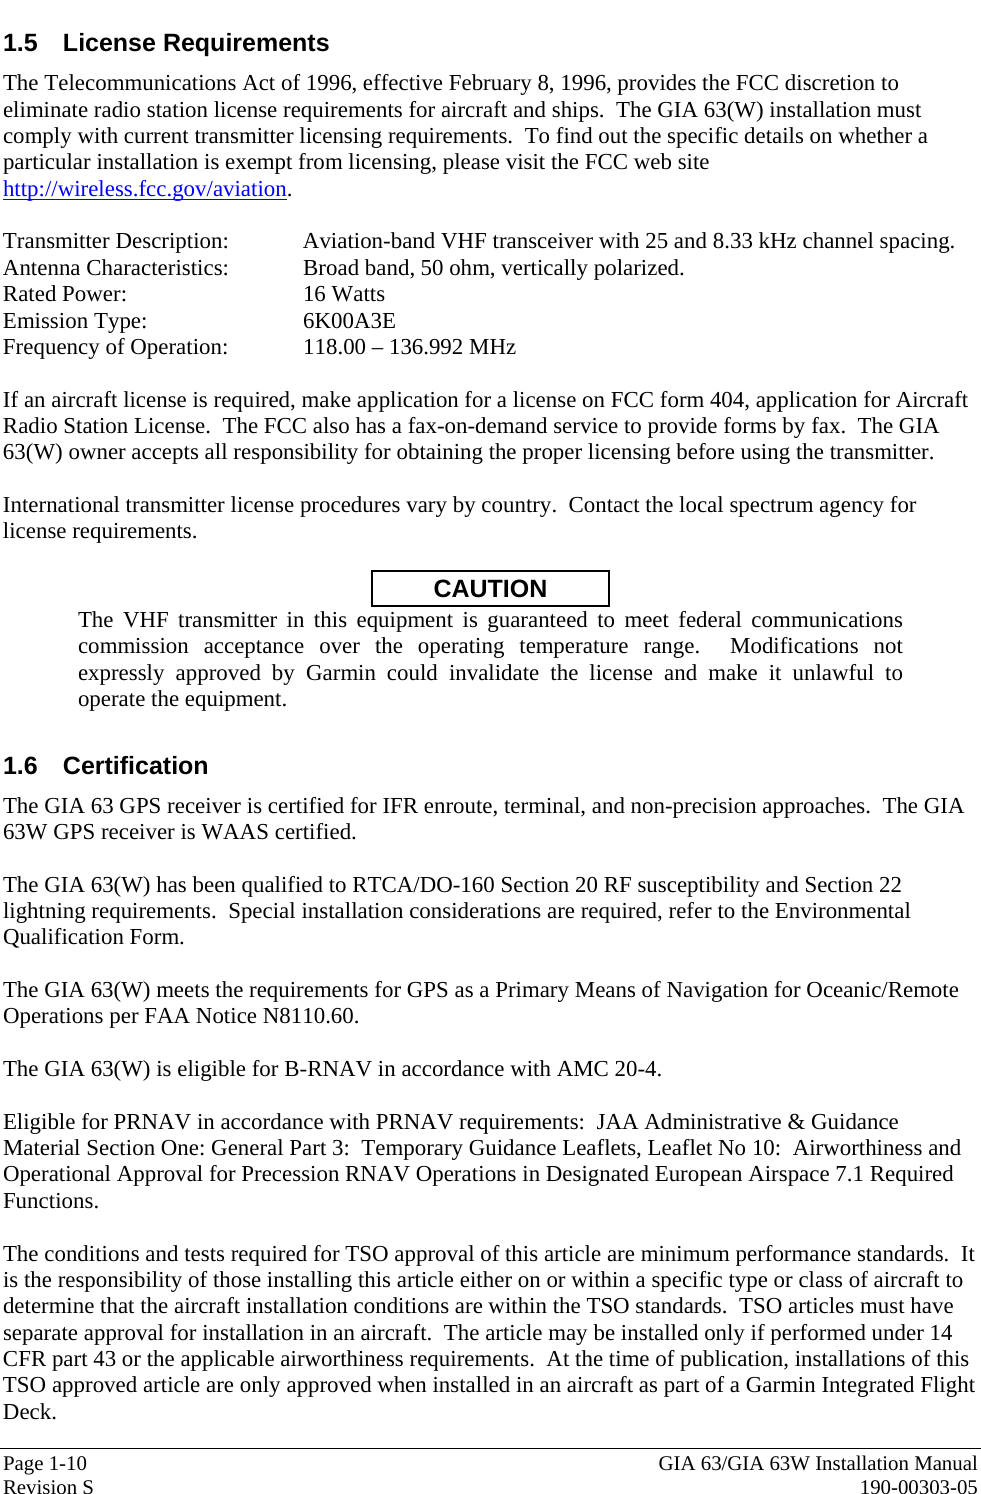  Page 1-10  GIA 63/GIA 63W Installation Manual Revision S  190-00303-05 1.5 License Requirements The Telecommunications Act of 1996, effective February 8, 1996, provides the FCC discretion to eliminate radio station license requirements for aircraft and ships.  The GIA 63(W) installation must comply with current transmitter licensing requirements.  To find out the specific details on whether a particular installation is exempt from licensing, please visit the FCC web site http://wireless.fcc.gov/aviation.  Transmitter Description:  Aviation-band VHF transceiver with 25 and 8.33 kHz channel spacing. Antenna Characteristics:  Broad band, 50 ohm, vertically polarized. Rated Power:   16 Watts Emission Type:   6K00A3E Frequency of Operation:  118.00 – 136.992 MHz    If an aircraft license is required, make application for a license on FCC form 404, application for Aircraft Radio Station License.  The FCC also has a fax-on-demand service to provide forms by fax.  The GIA 63(W) owner accepts all responsibility for obtaining the proper licensing before using the transmitter.  International transmitter license procedures vary by country.  Contact the local spectrum agency for license requirements.  CAUTION The VHF transmitter in this equipment is guaranteed to meet federal communications commission acceptance over the operating temperature range.  Modifications not expressly approved by Garmin could invalidate the license and make it unlawful to operate the equipment.  1.6 Certification The GIA 63 GPS receiver is certified for IFR enroute, terminal, and non-precision approaches.  The GIA 63W GPS receiver is WAAS certified.   The GIA 63(W) has been qualified to RTCA/DO-160 Section 20 RF susceptibility and Section 22 lightning requirements.  Special installation considerations are required, refer to the Environmental Qualification Form.  The GIA 63(W) meets the requirements for GPS as a Primary Means of Navigation for Oceanic/Remote Operations per FAA Notice N8110.60.  The GIA 63(W) is eligible for B-RNAV in accordance with AMC 20-4.  Eligible for PRNAV in accordance with PRNAV requirements:  JAA Administrative &amp; Guidance Material Section One: General Part 3:  Temporary Guidance Leaflets, Leaflet No 10:  Airworthiness and Operational Approval for Precession RNAV Operations in Designated European Airspace 7.1 Required Functions.  The conditions and tests required for TSO approval of this article are minimum performance standards.  It is the responsibility of those installing this article either on or within a specific type or class of aircraft to determine that the aircraft installation conditions are within the TSO standards.  TSO articles must have separate approval for installation in an aircraft.  The article may be installed only if performed under 14 CFR part 43 or the applicable airworthiness requirements.  At the time of publication, installations of this TSO approved article are only approved when installed in an aircraft as part of a Garmin Integrated Flight Deck.  